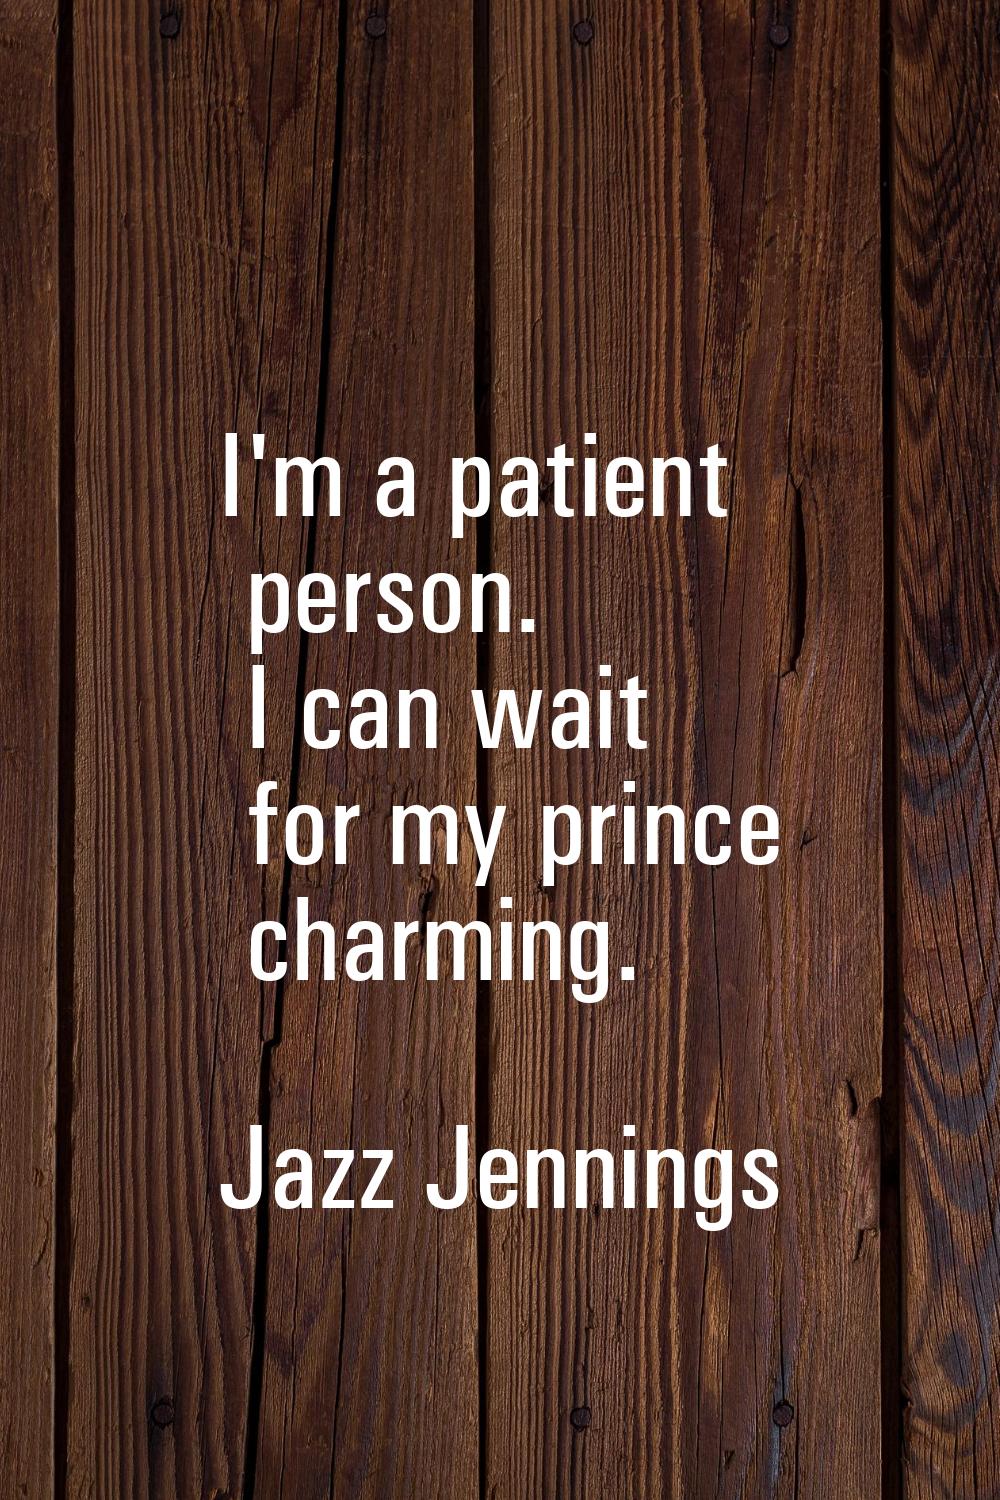 I'm a patient person. I can wait for my prince charming.